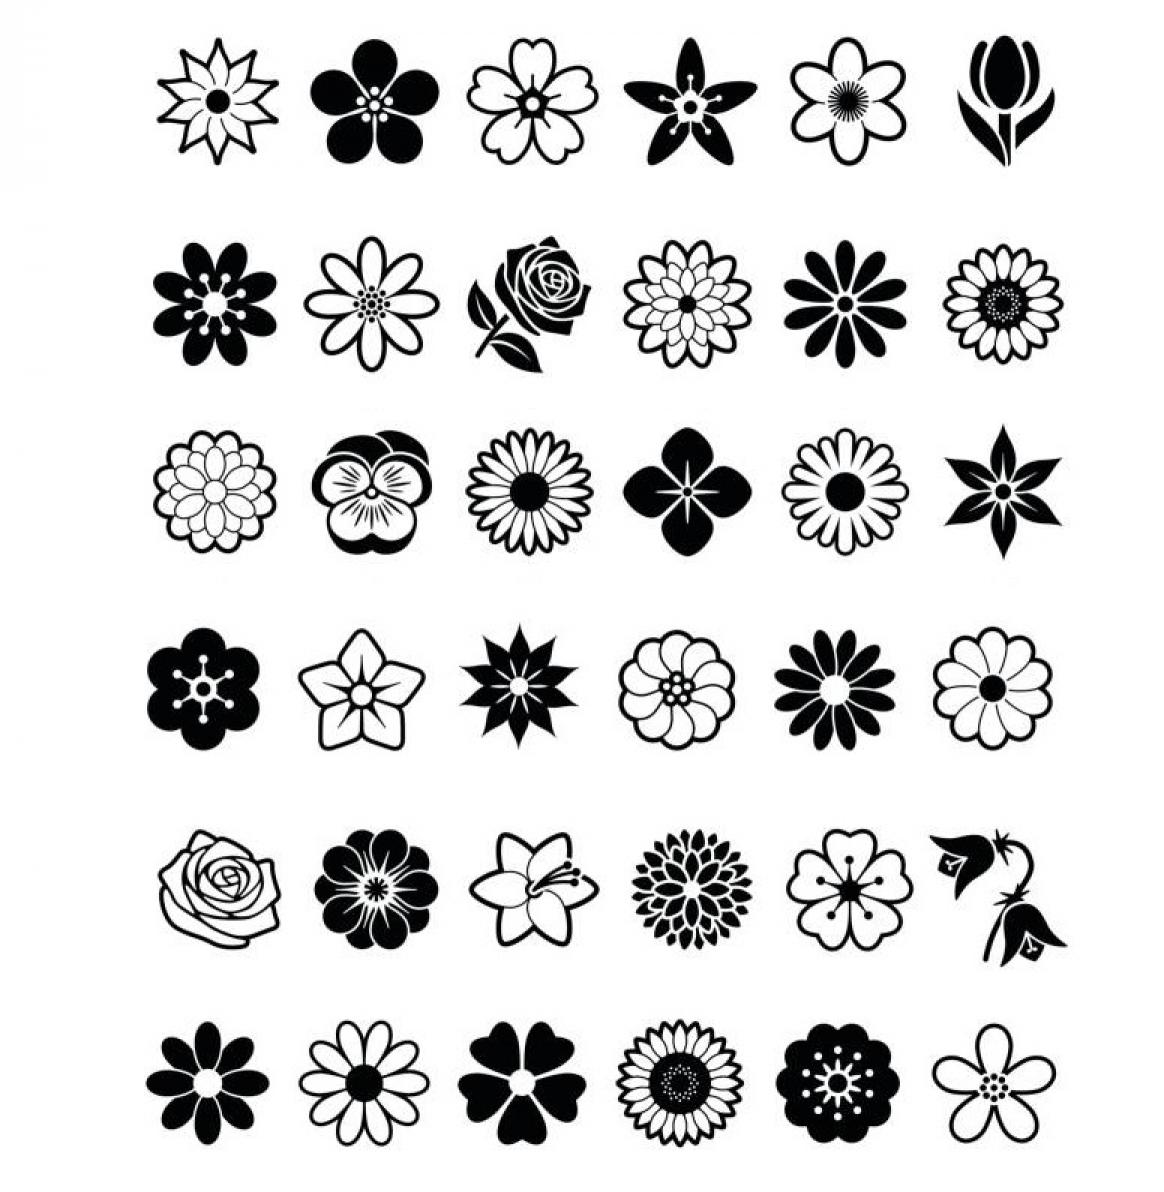 Printable flower icons bw Coloring Page for kids.